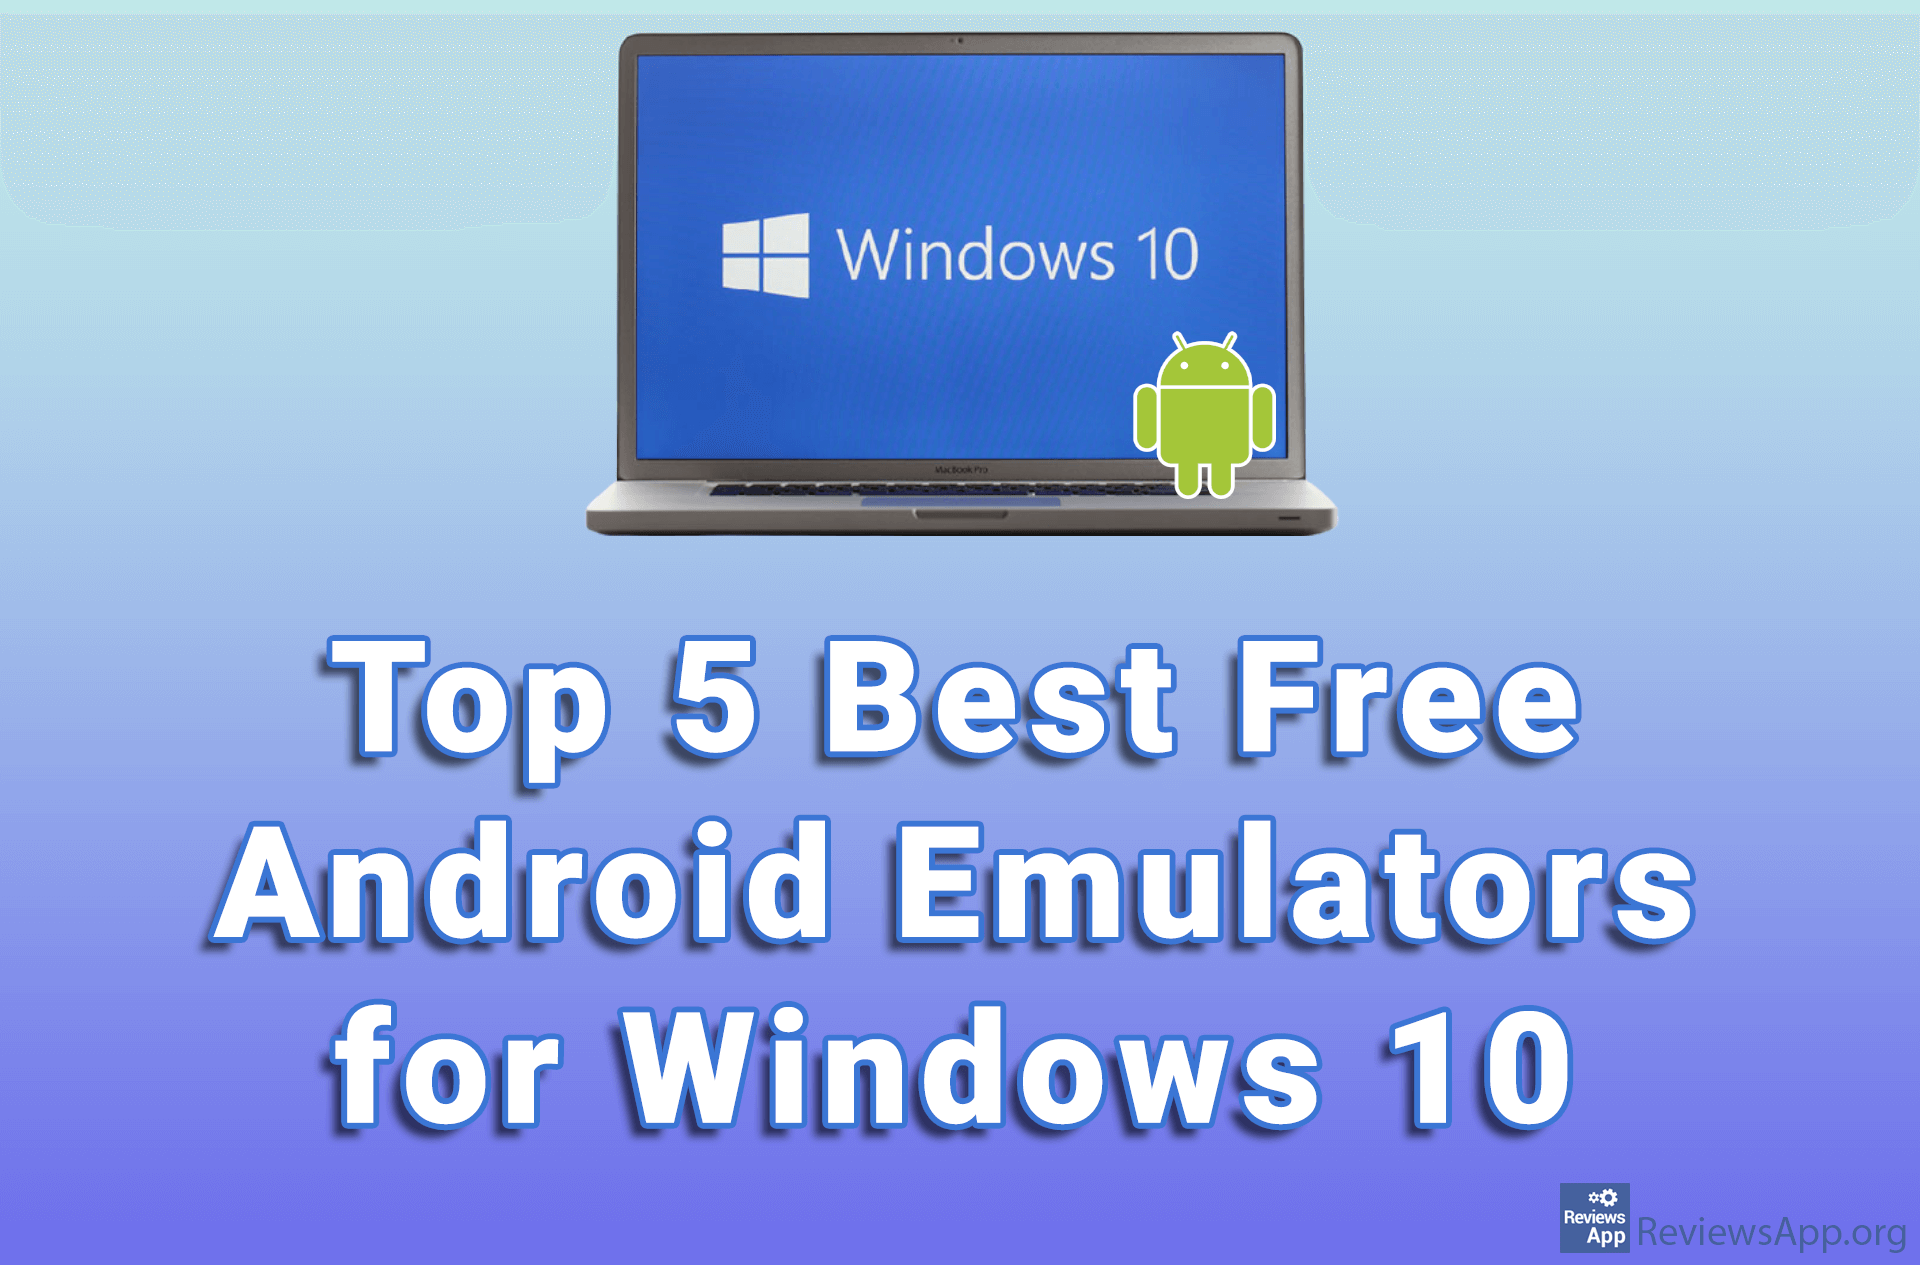 Top 5 Best Free Android Emulators for Windows 10